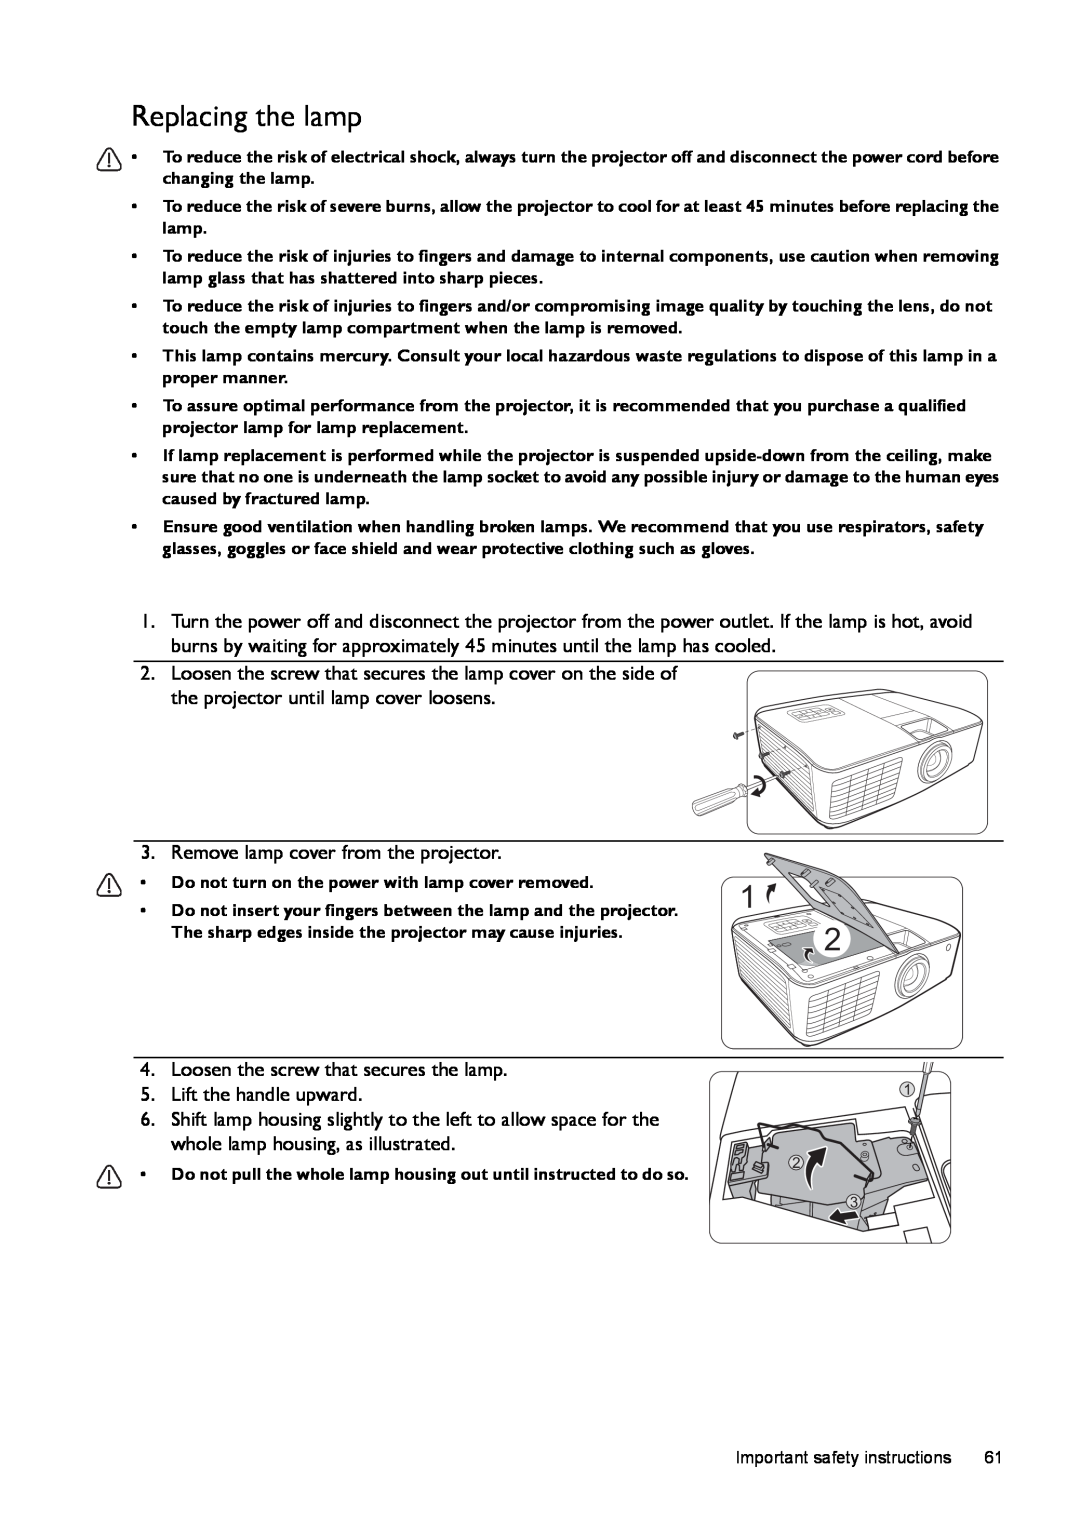 BenQ W1500 user manual Replacing the lamp, Remove lamp cover from the projector, Loosen the screw that secures the lamp 